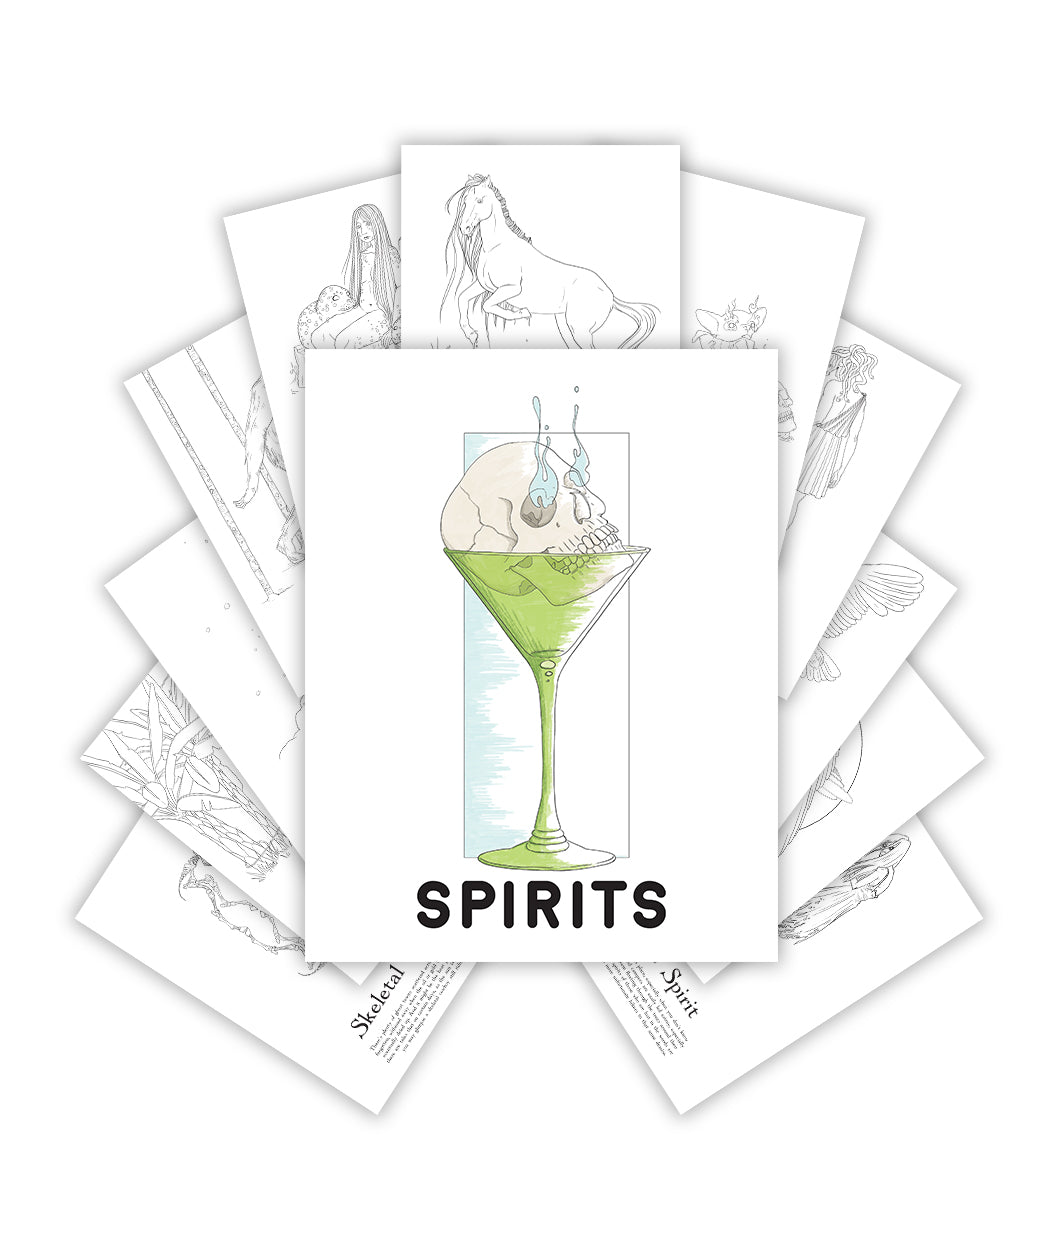 Cover of coloring book with a green martini glass and a skull resting inside with blue flames coming out of the eye sockets. “Spirits” is underneath in black sans serif font. Behind cover are eleven different sketches to color - from Spirits